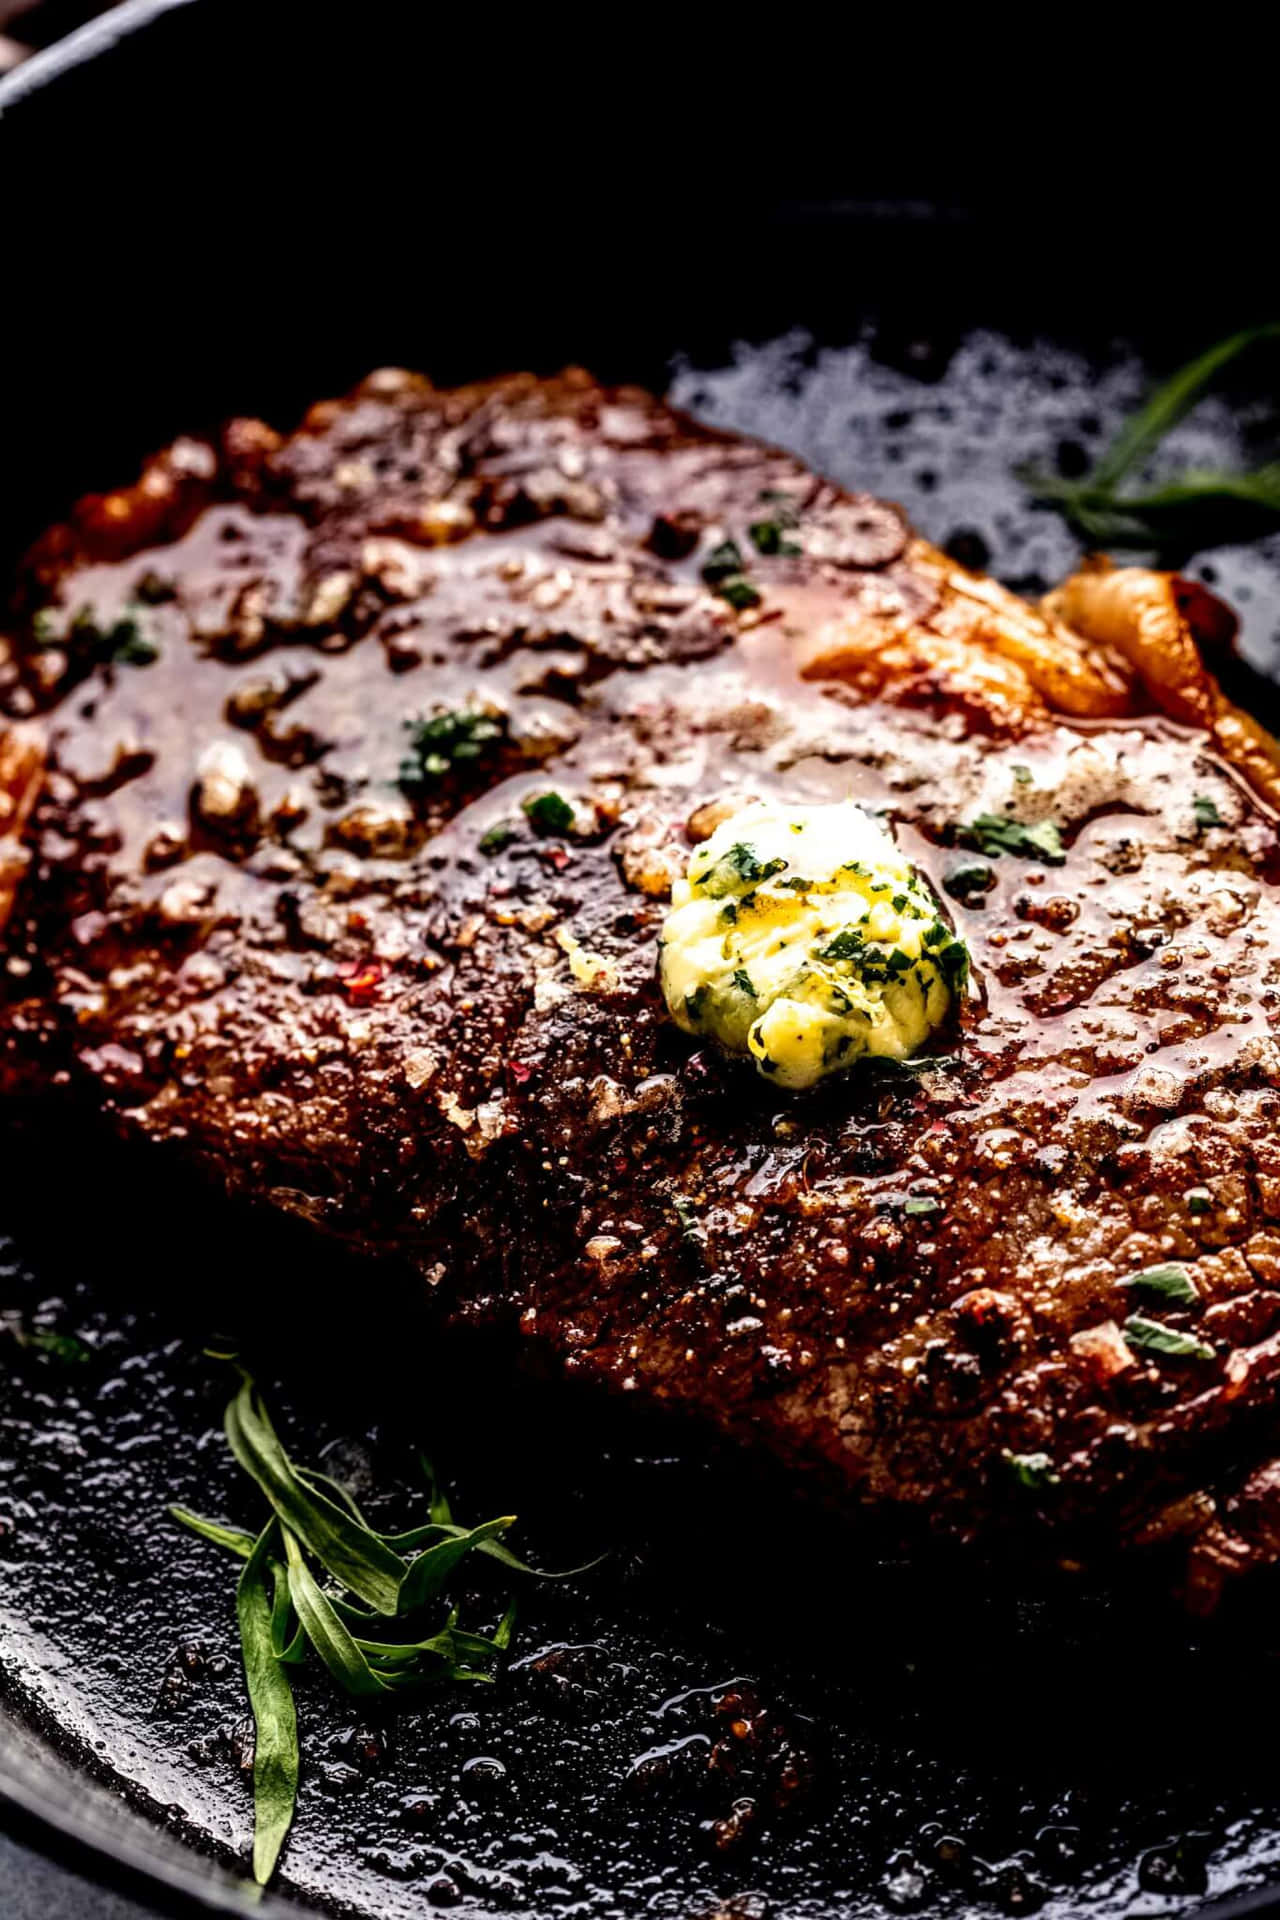 A Steak Is In A Skillet With Butter And Herbs